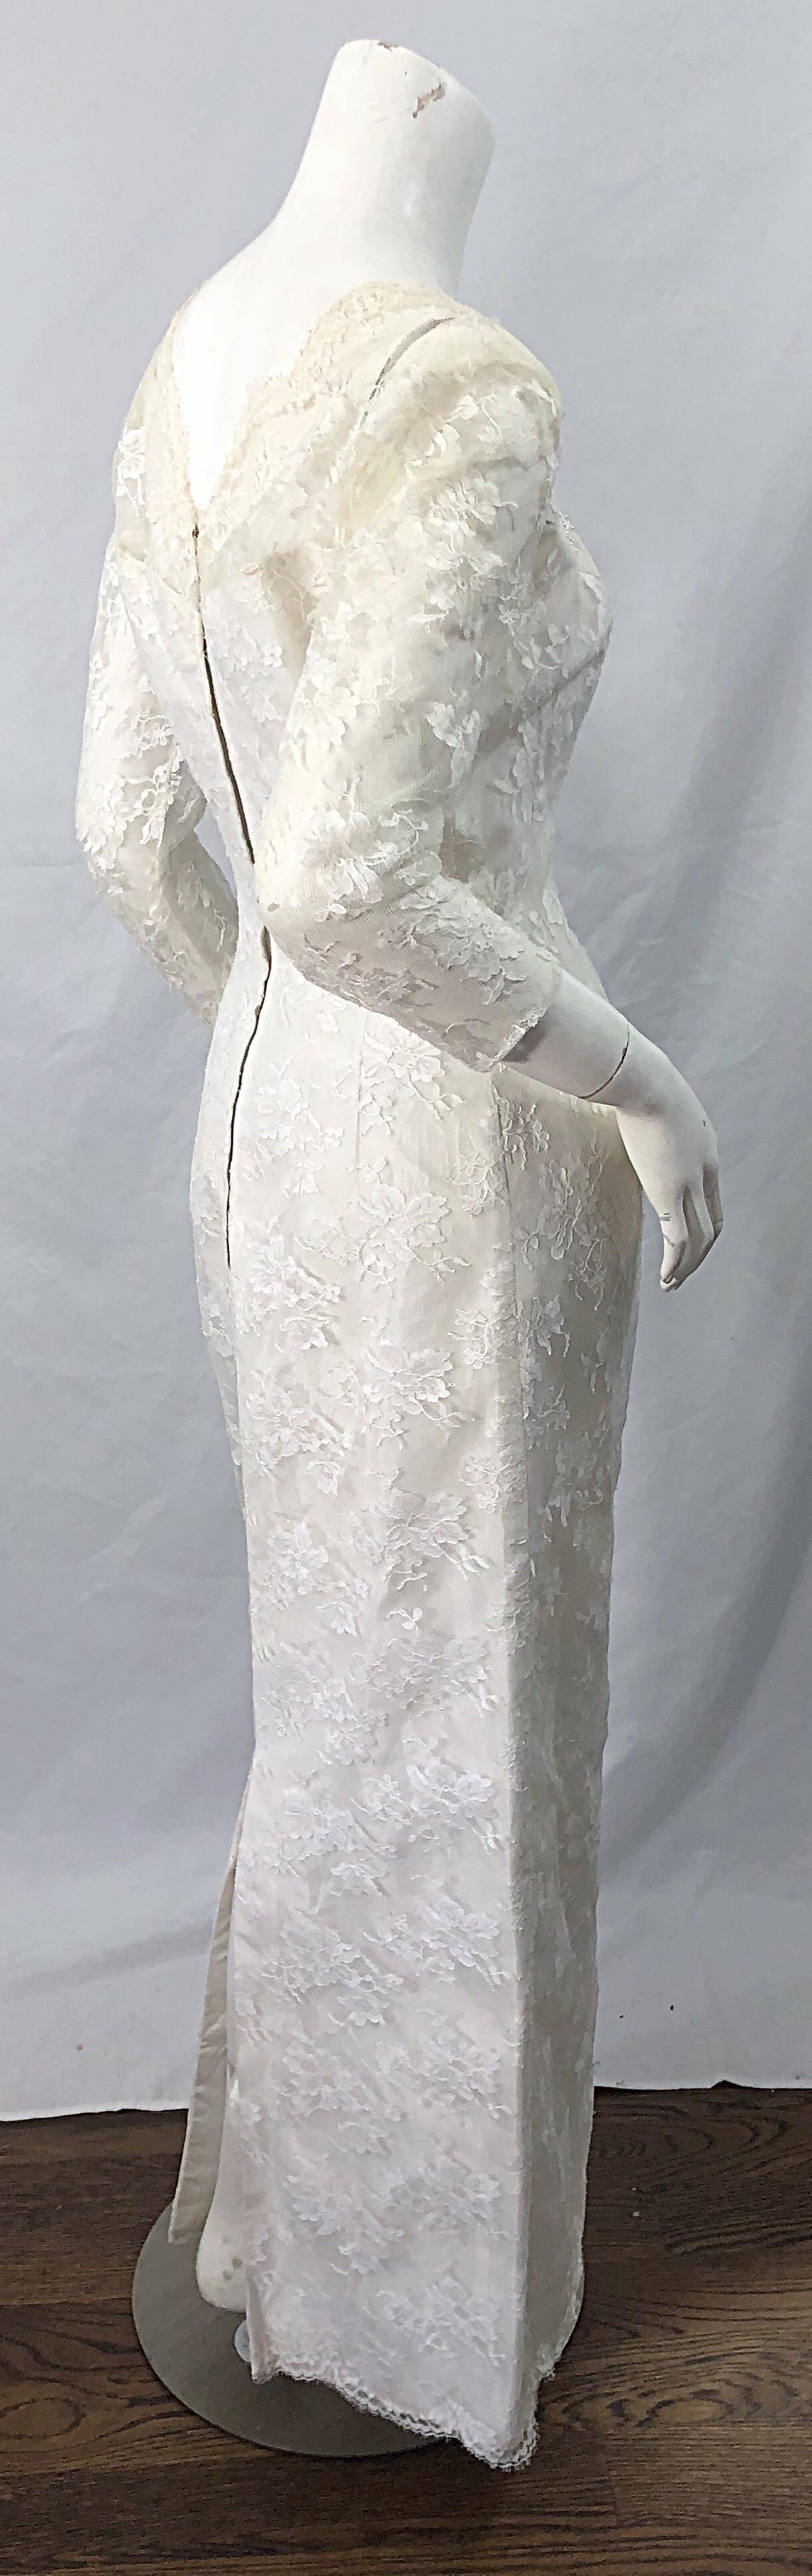 Women's 1960s An Original By Constantino White Beaded Couture Vintage Wedding Dress Gown For Sale